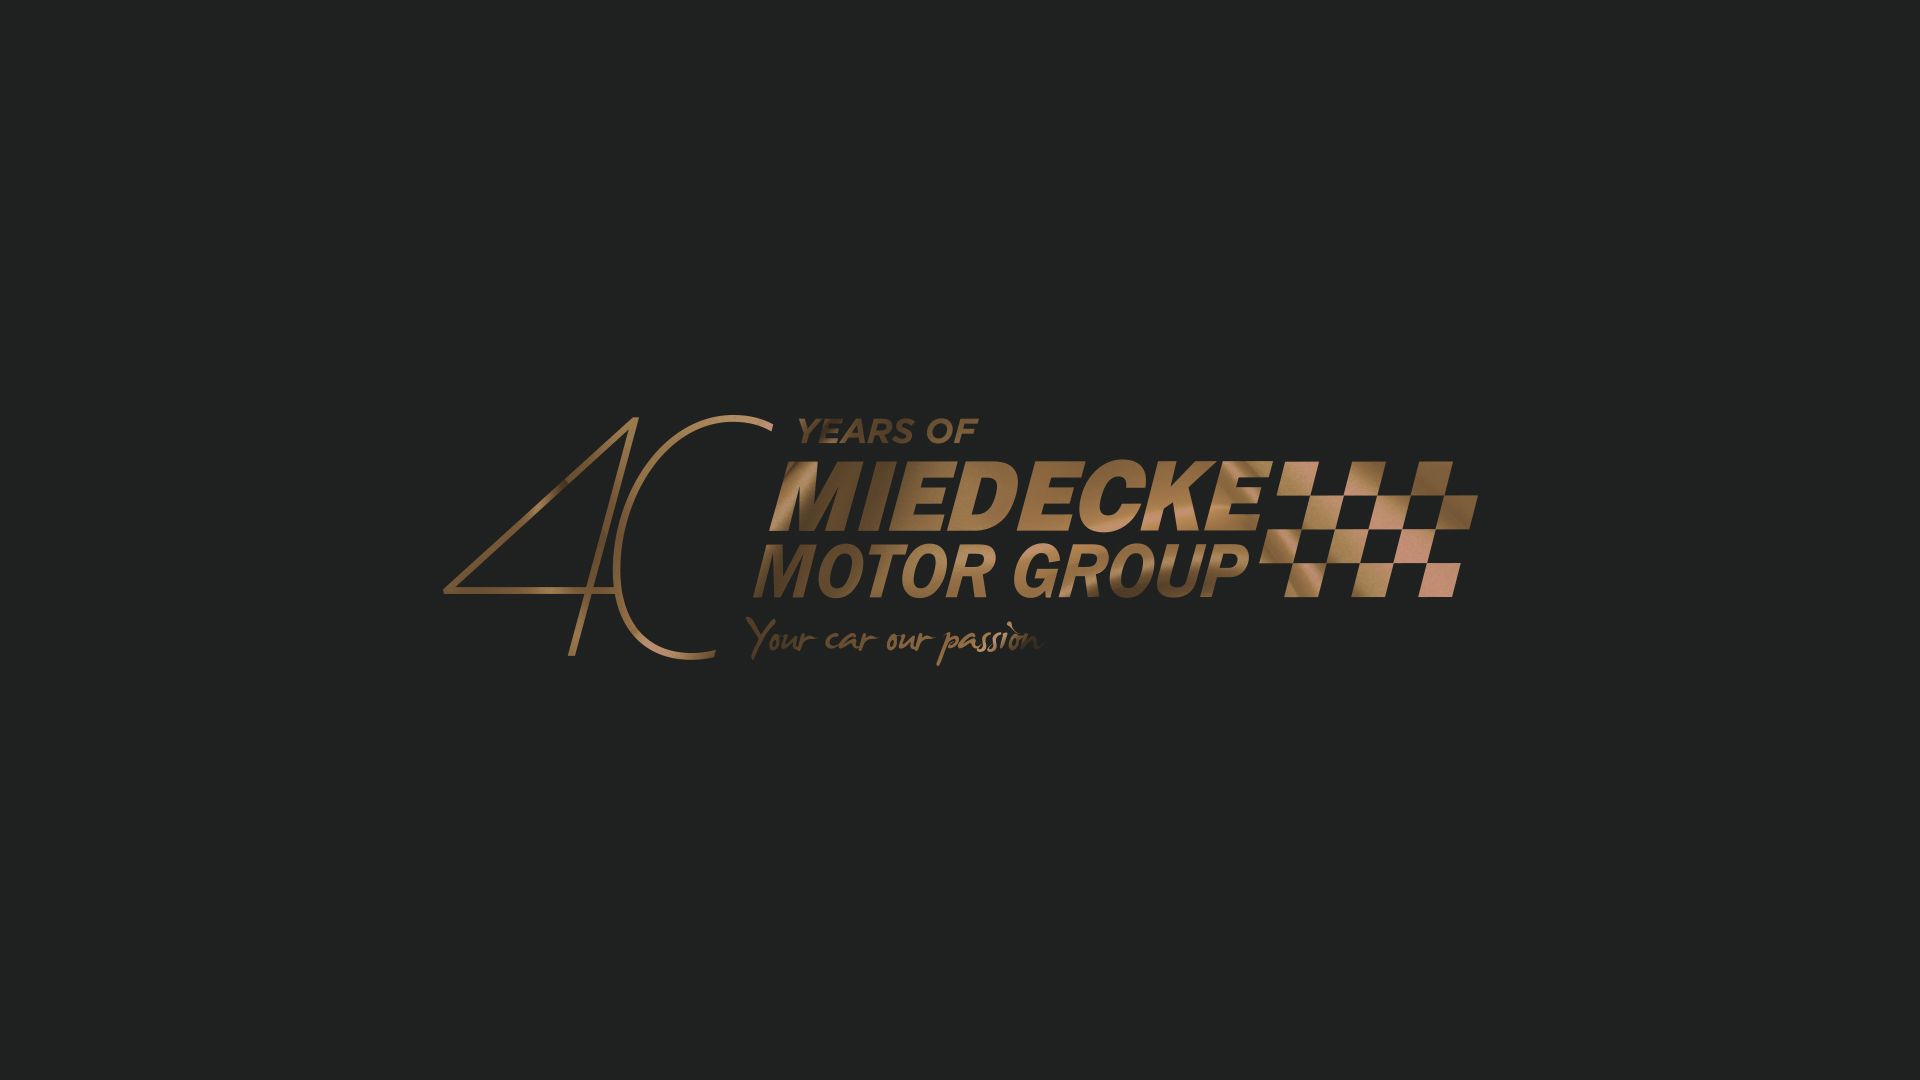 Graphic Design services for Miedecke Motor Group